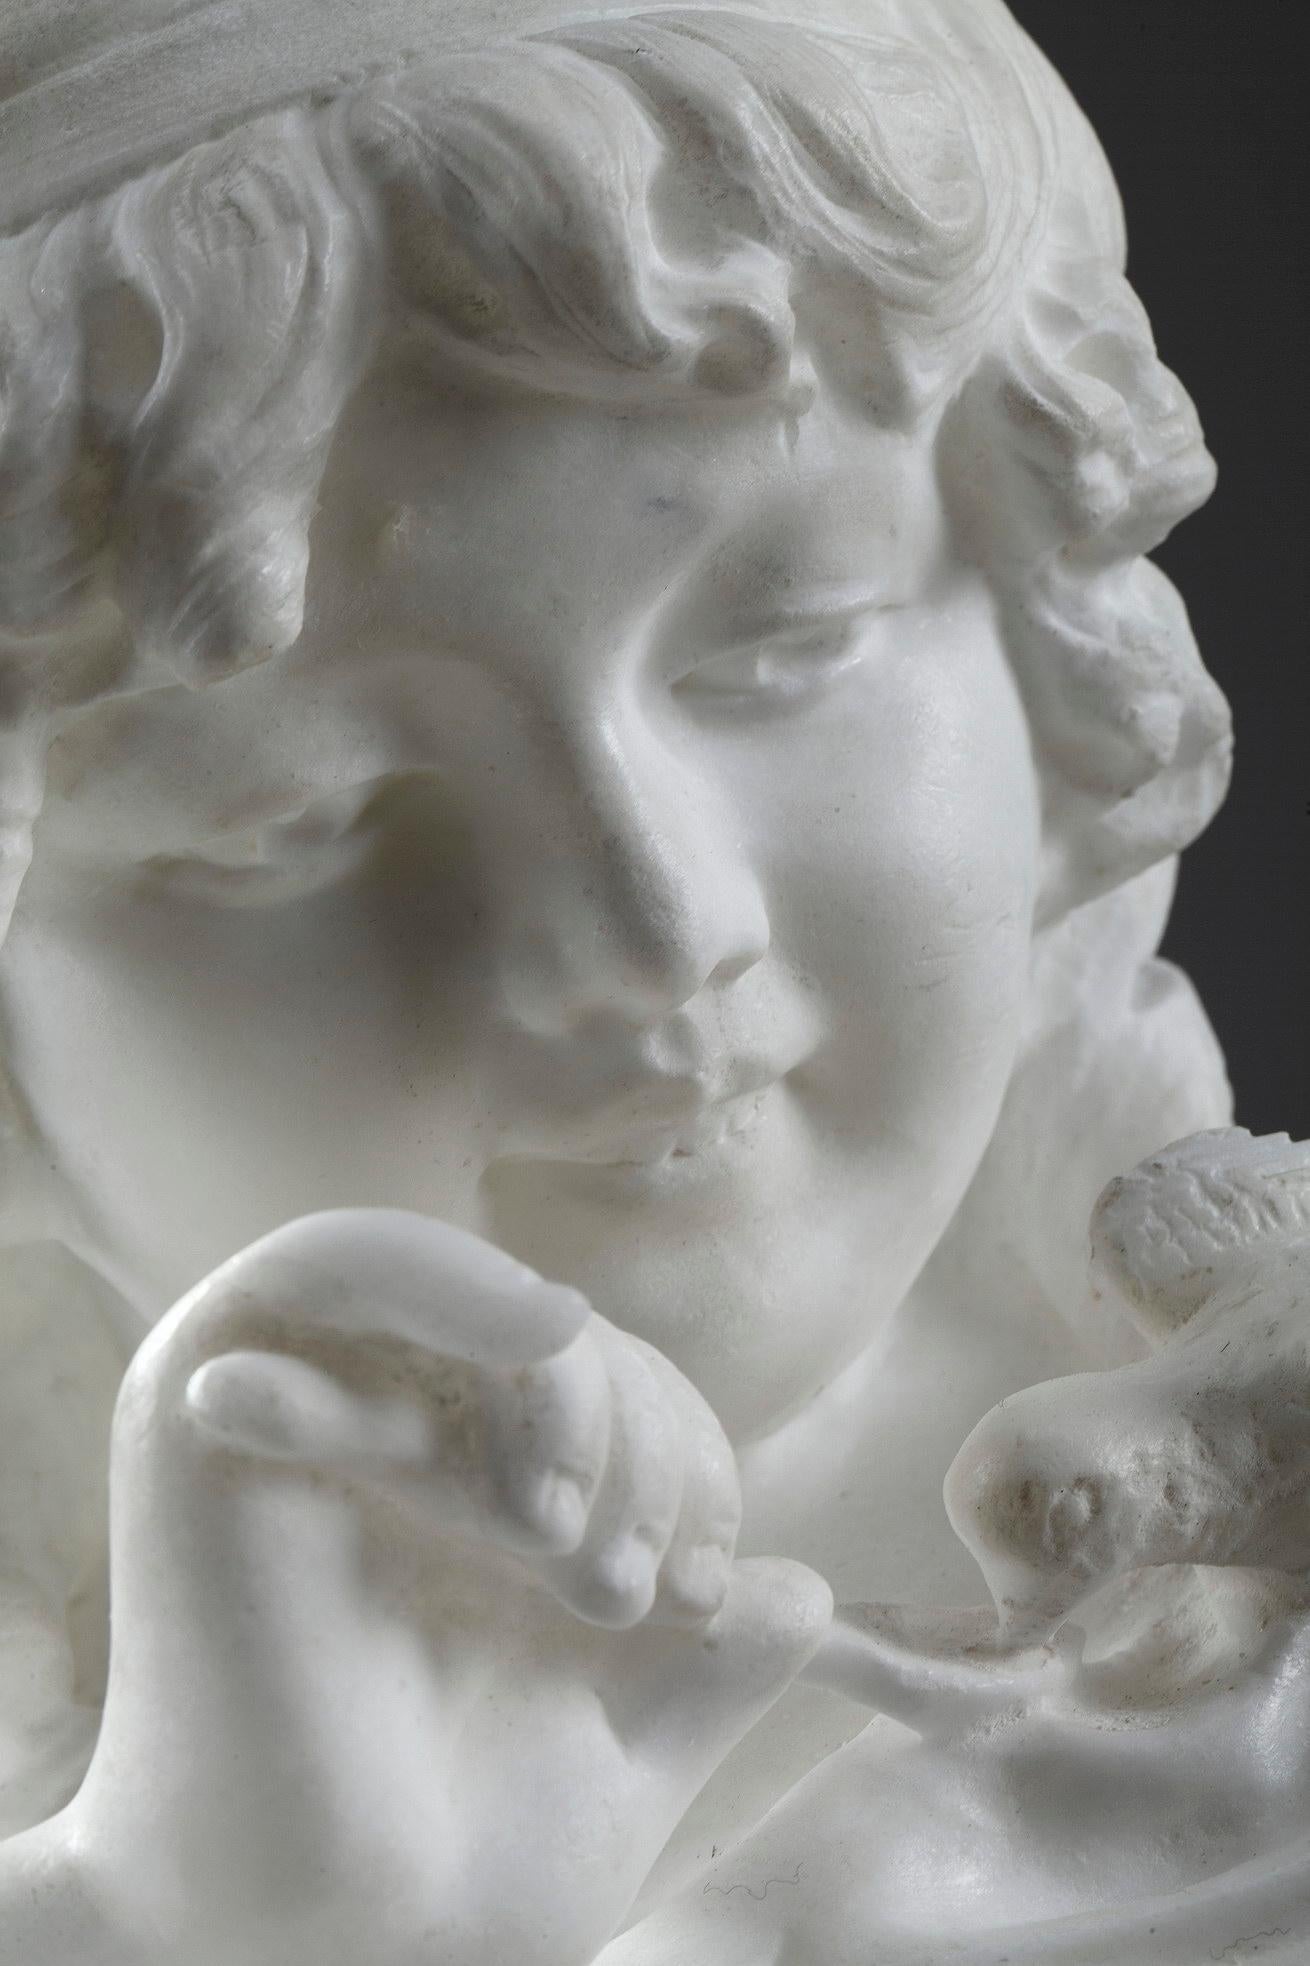 Late 19th century white marble sculpture of a young Italian feeding a bird. Every aspect of this marble bust is lifelike, from the girl’s intricately crafted dress to the delicate face and bird. Lapini was admired for the refinement of his technique